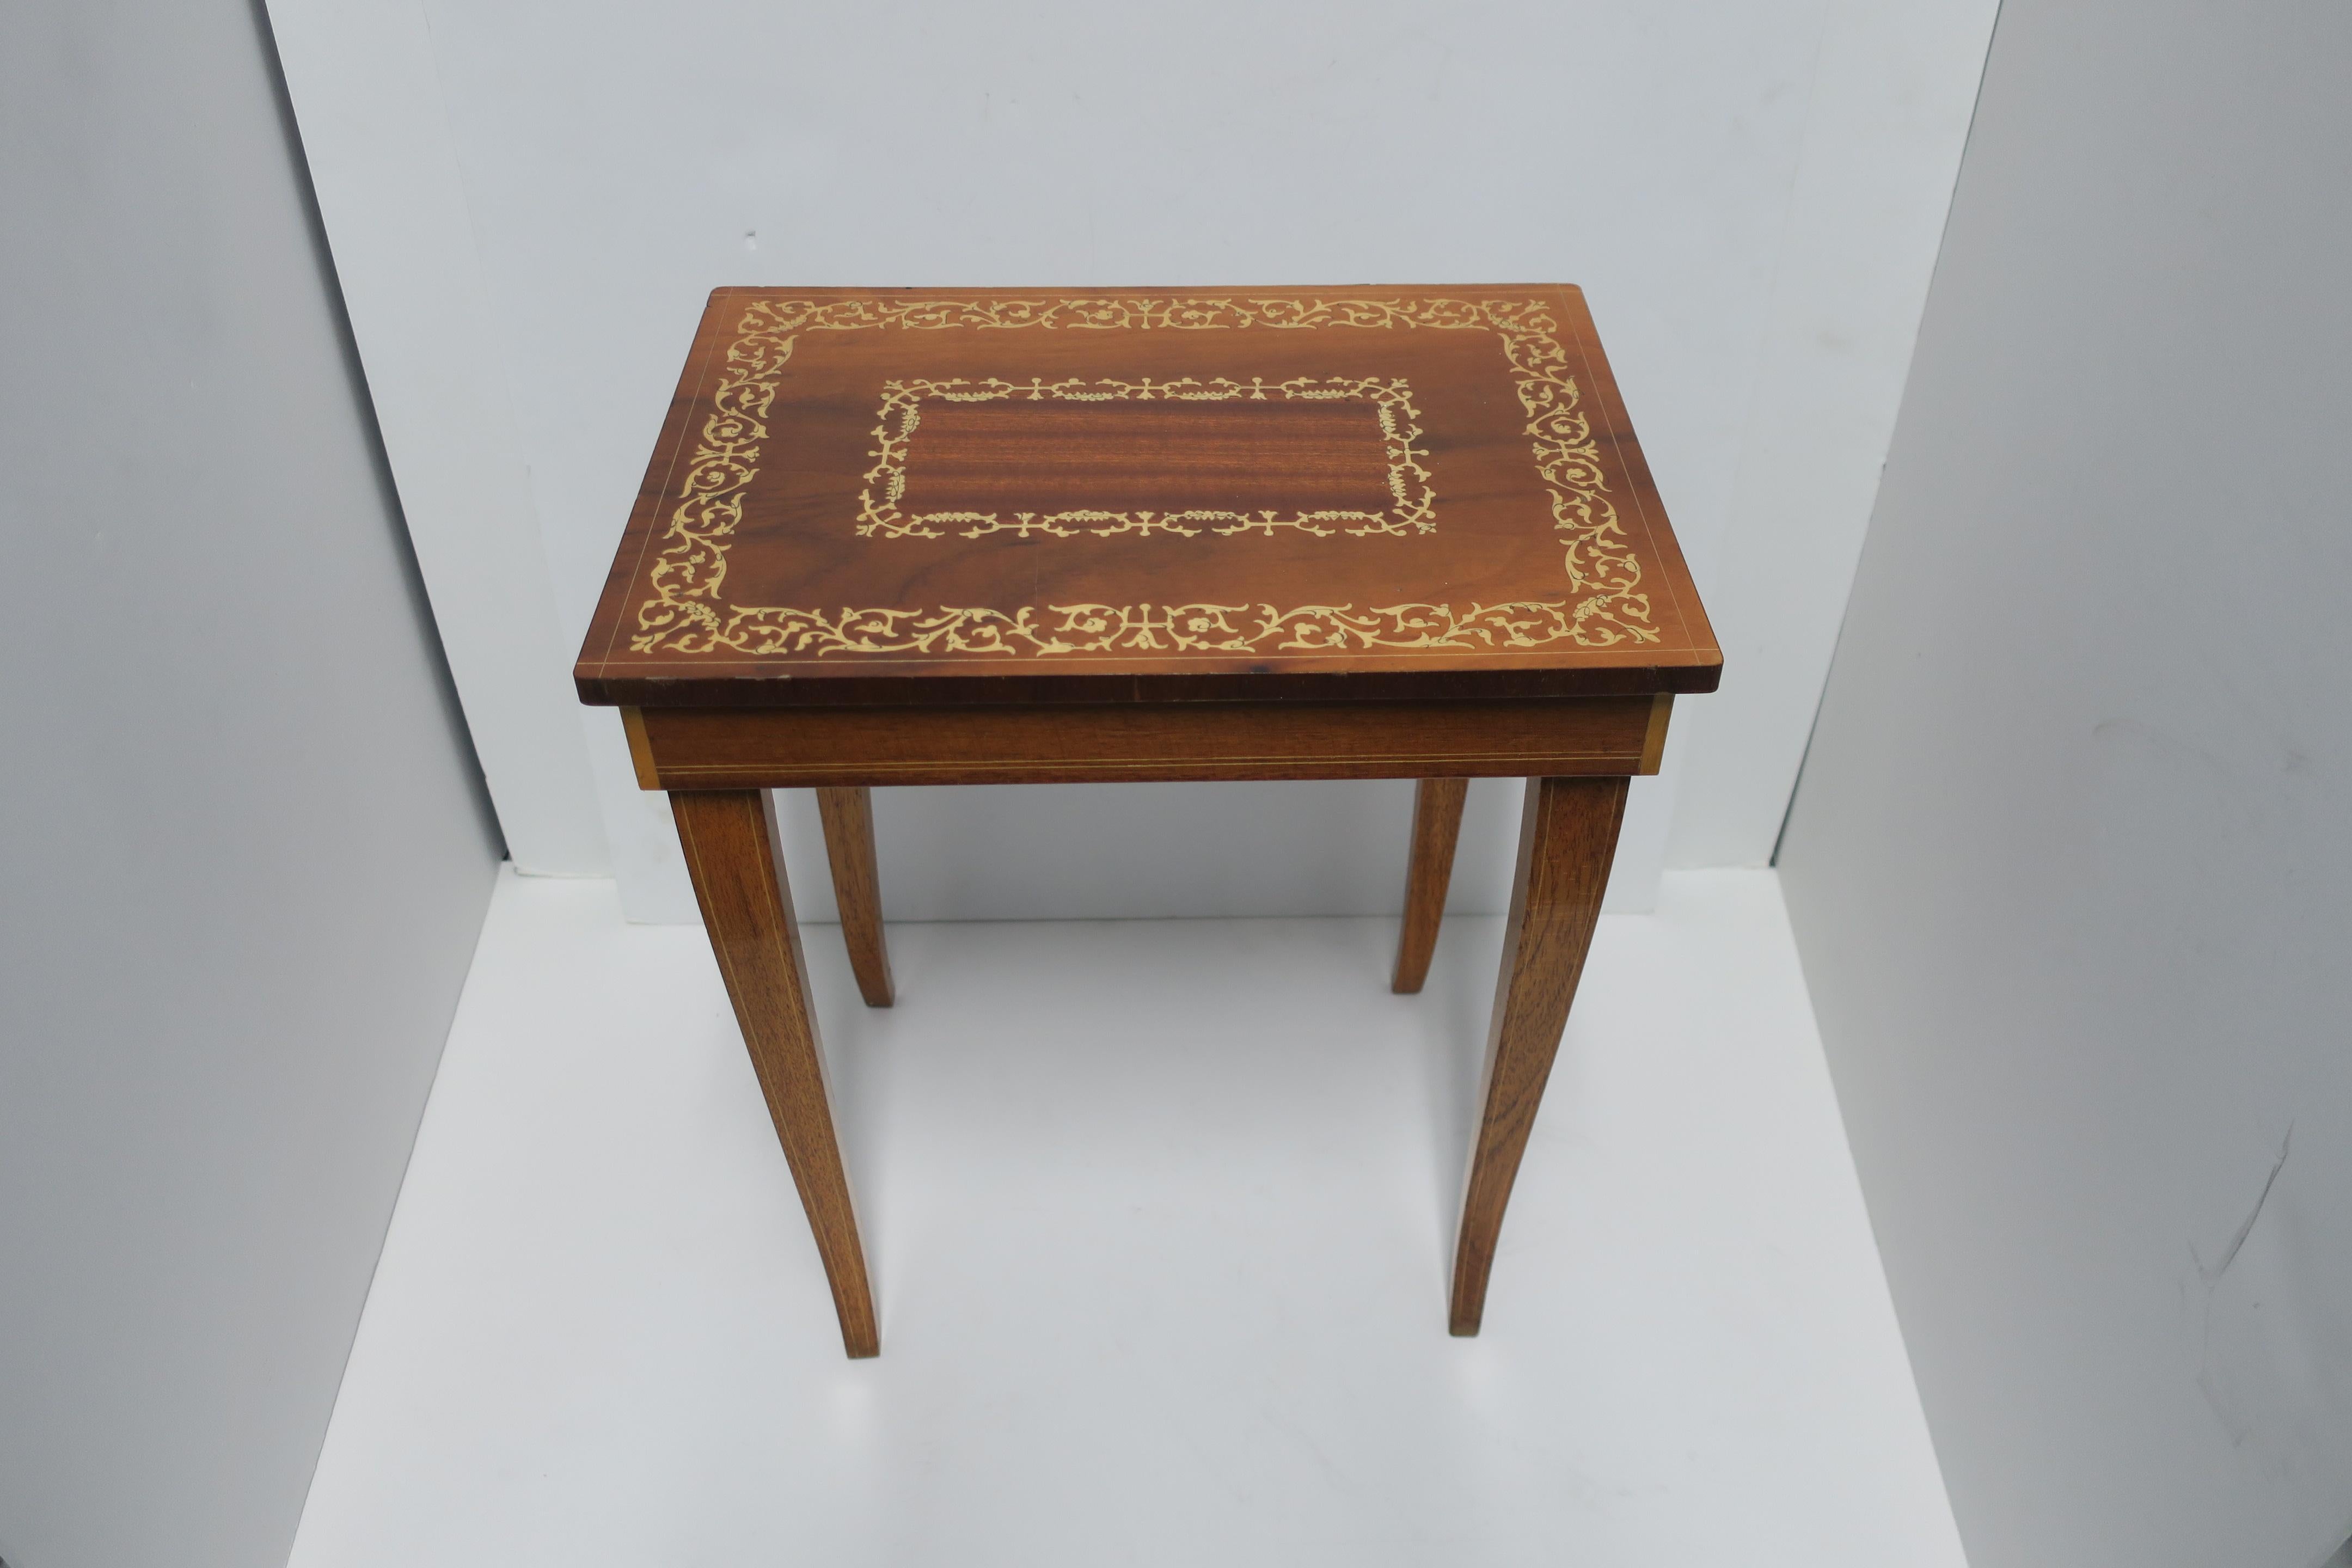 Varnished Italian Side or End Table with Storage and Music Box in the Rococo Style